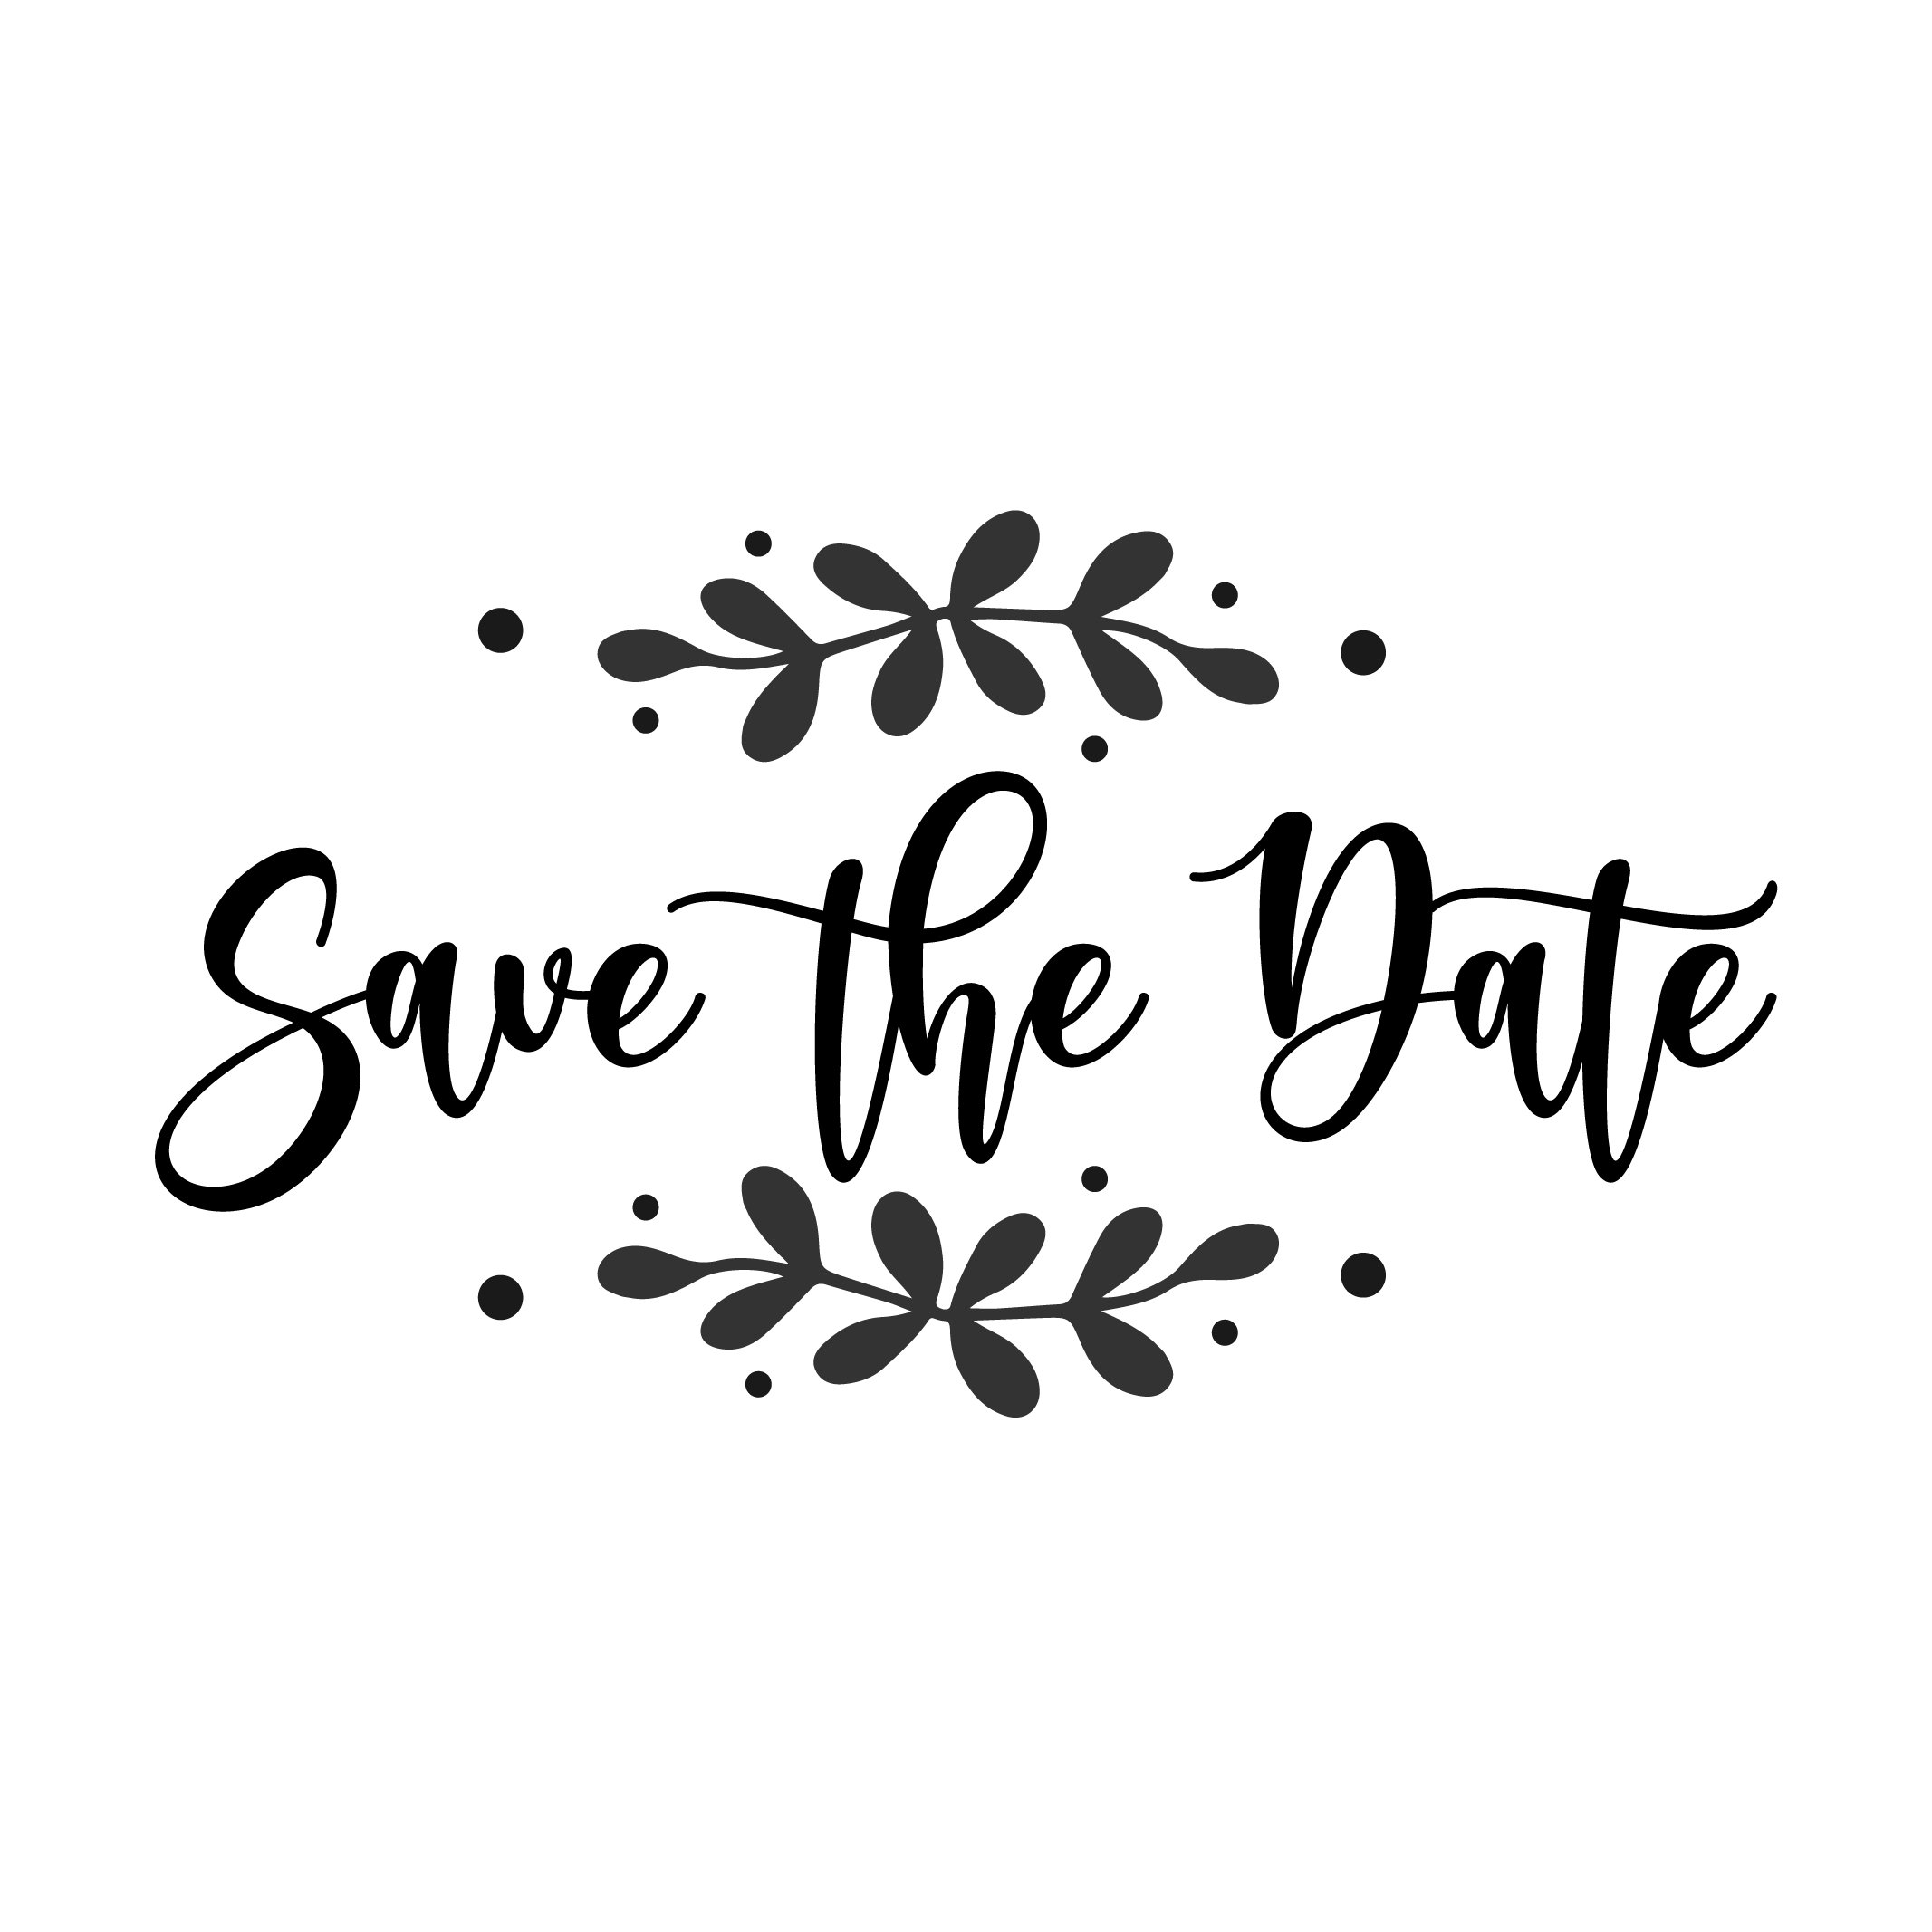 free-save-the-date-jpg-image-download-template